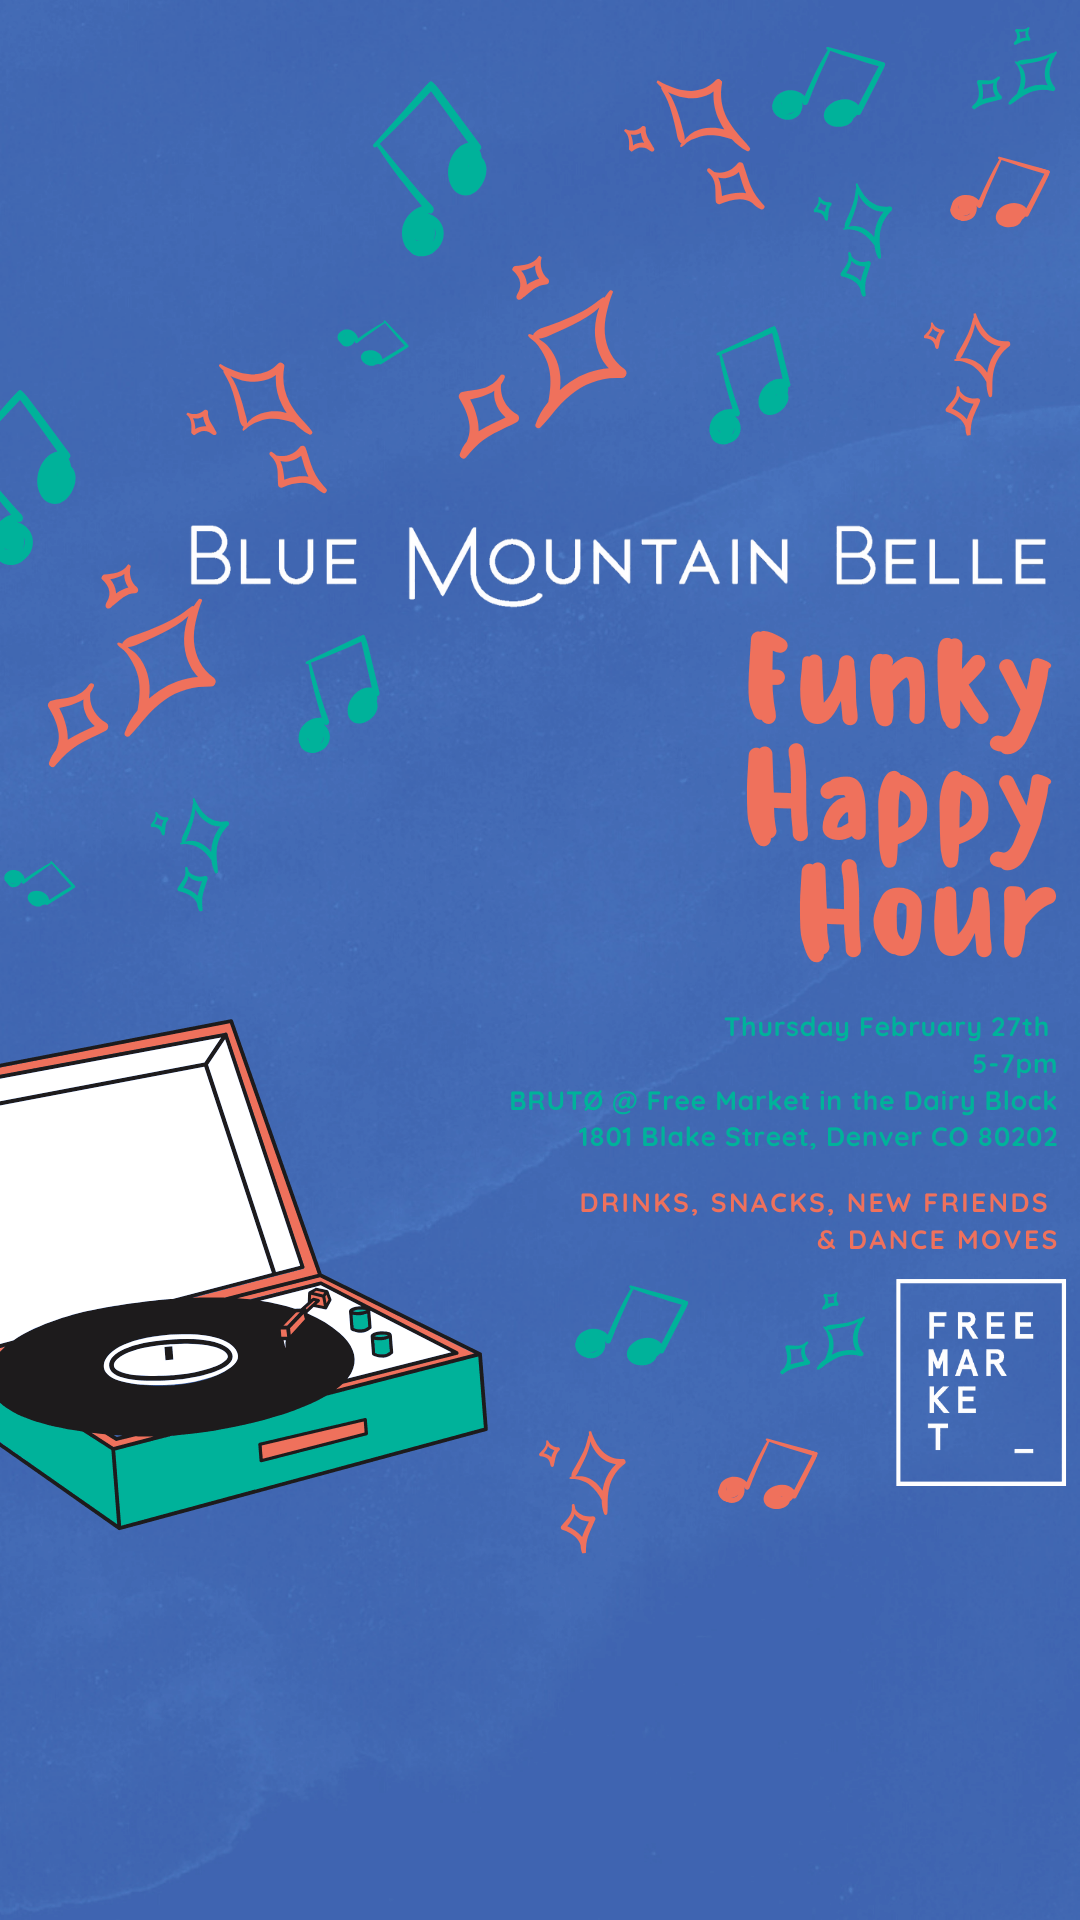 BMB Funky Happy Hour @ BRUTO in Free Market